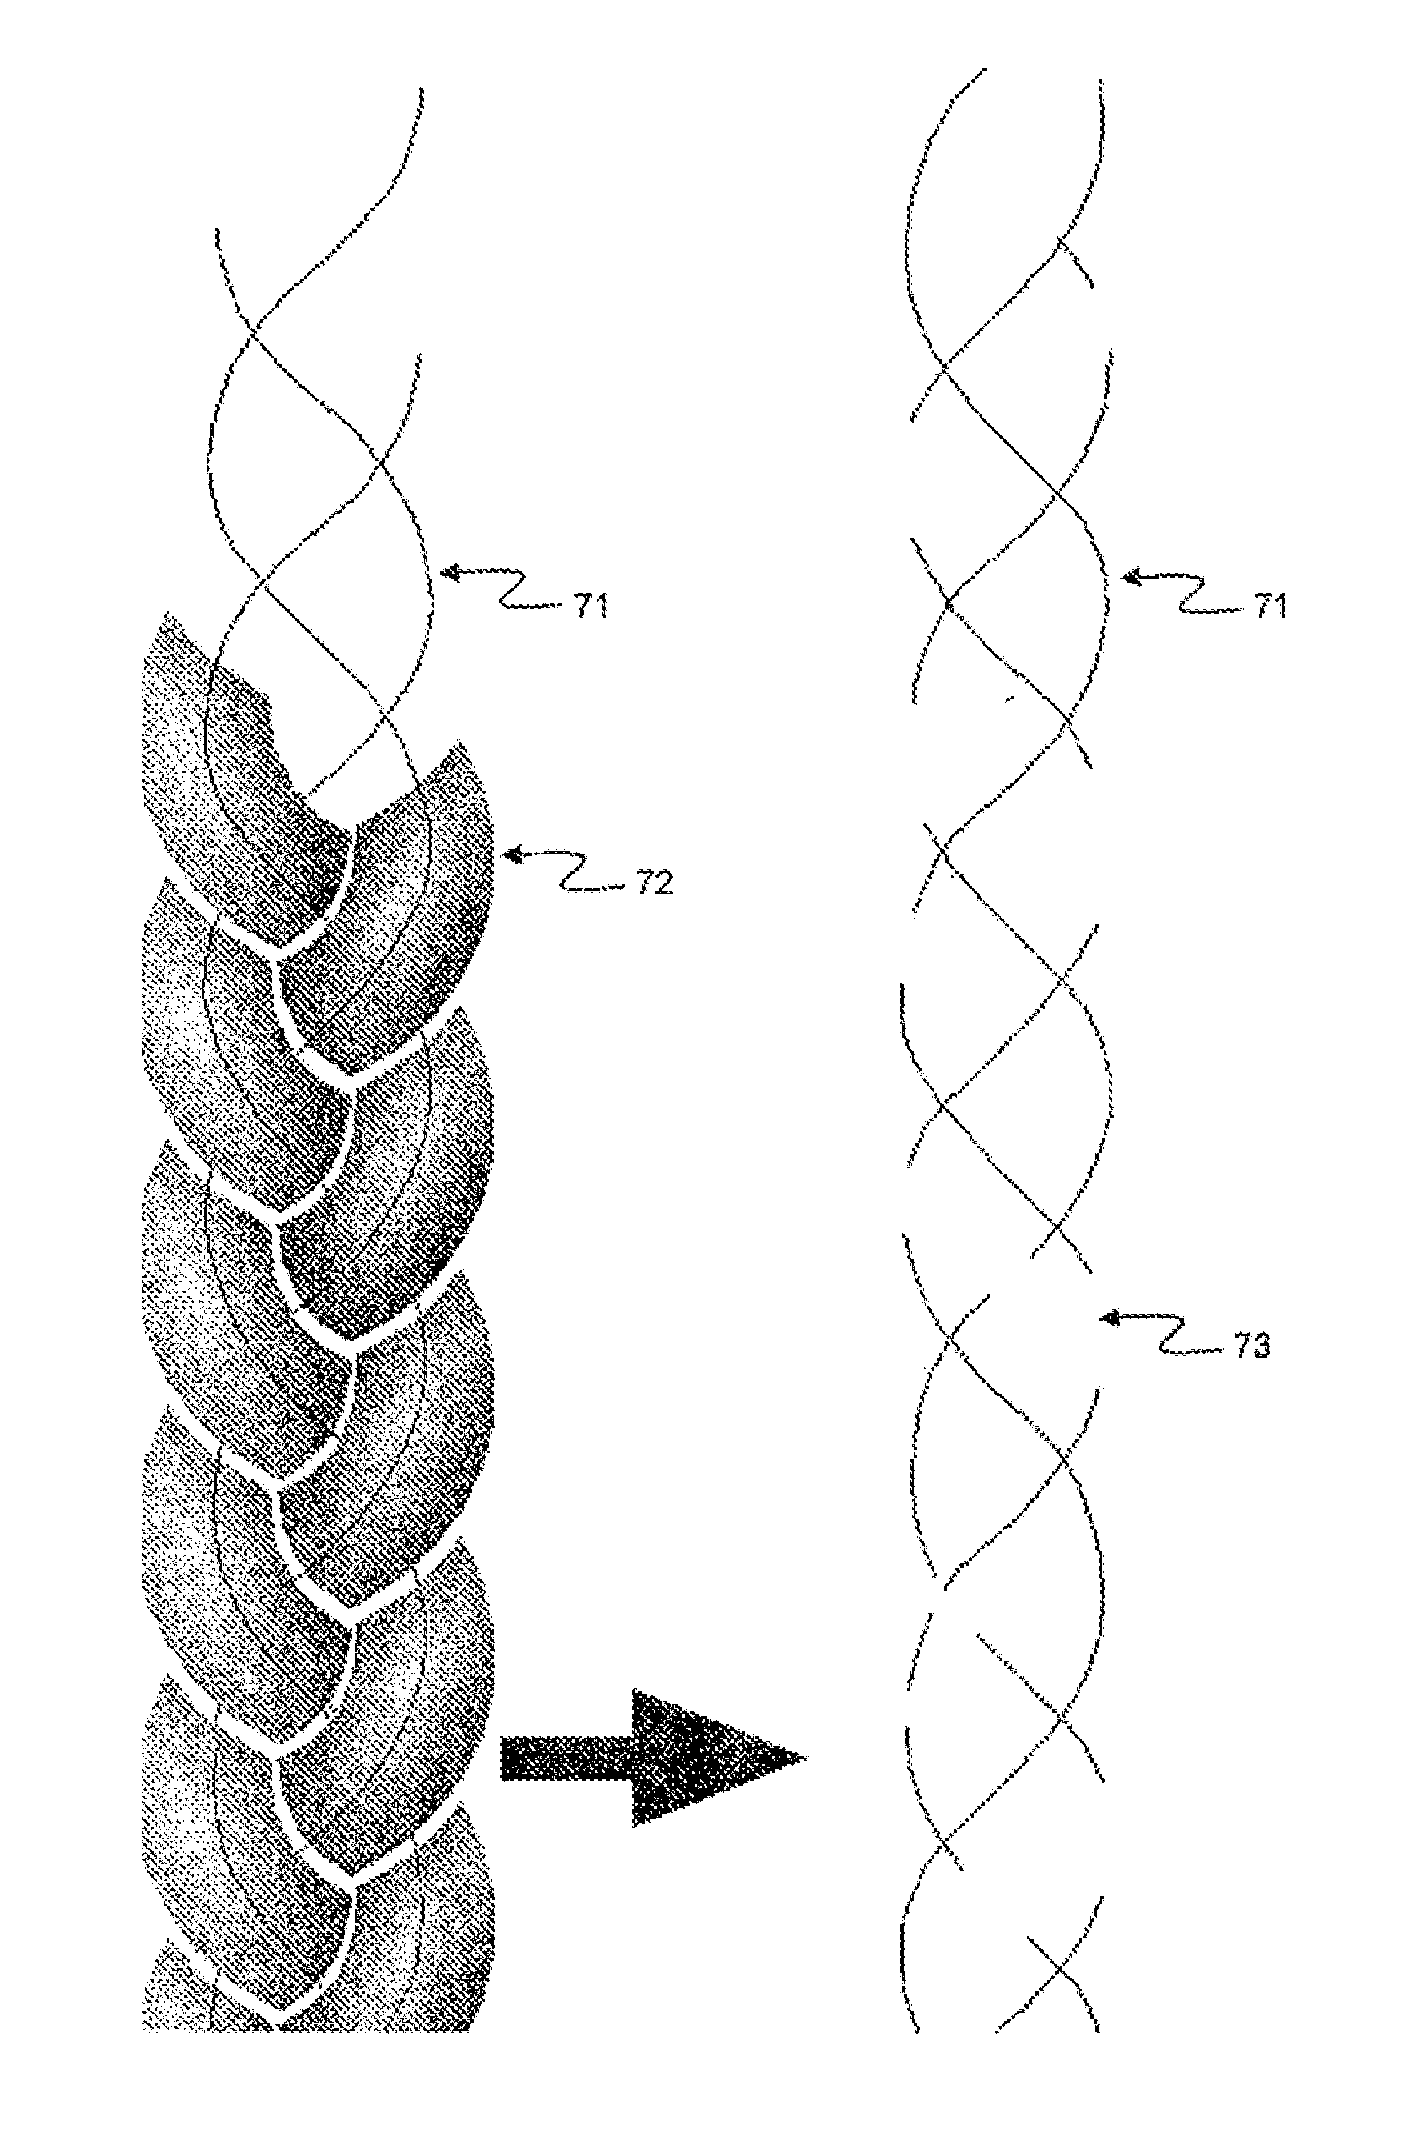 Supporting and forming transitional material for use in supporting prosthesis devices, implants and to provide structure in a human body